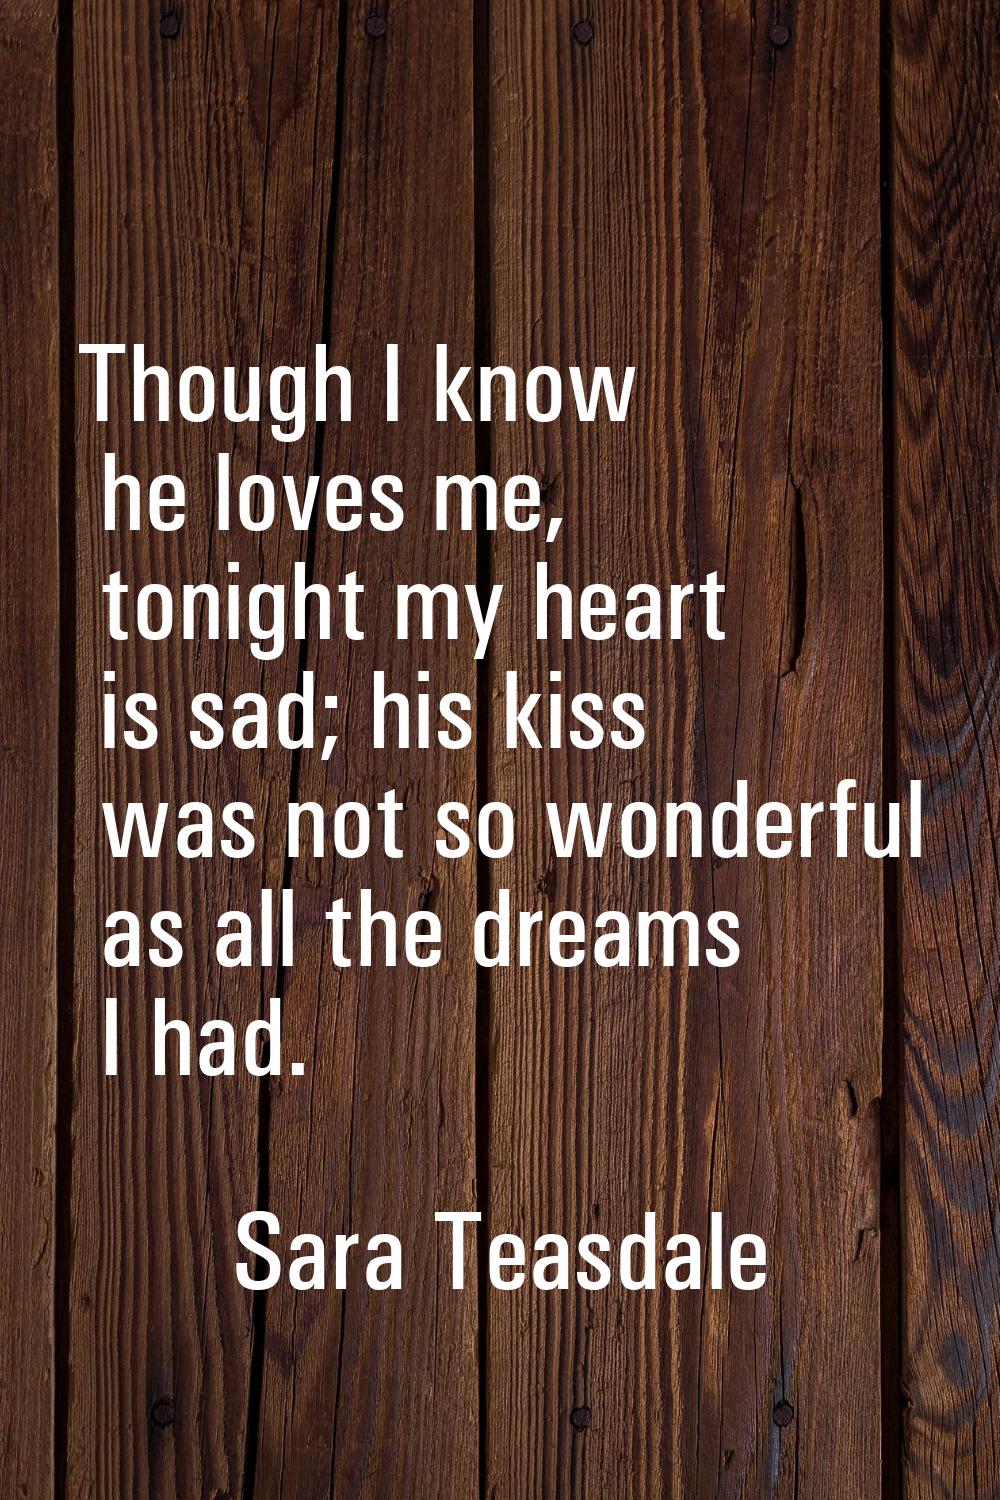 Though I know he loves me, tonight my heart is sad; his kiss was not so wonderful as all the dreams